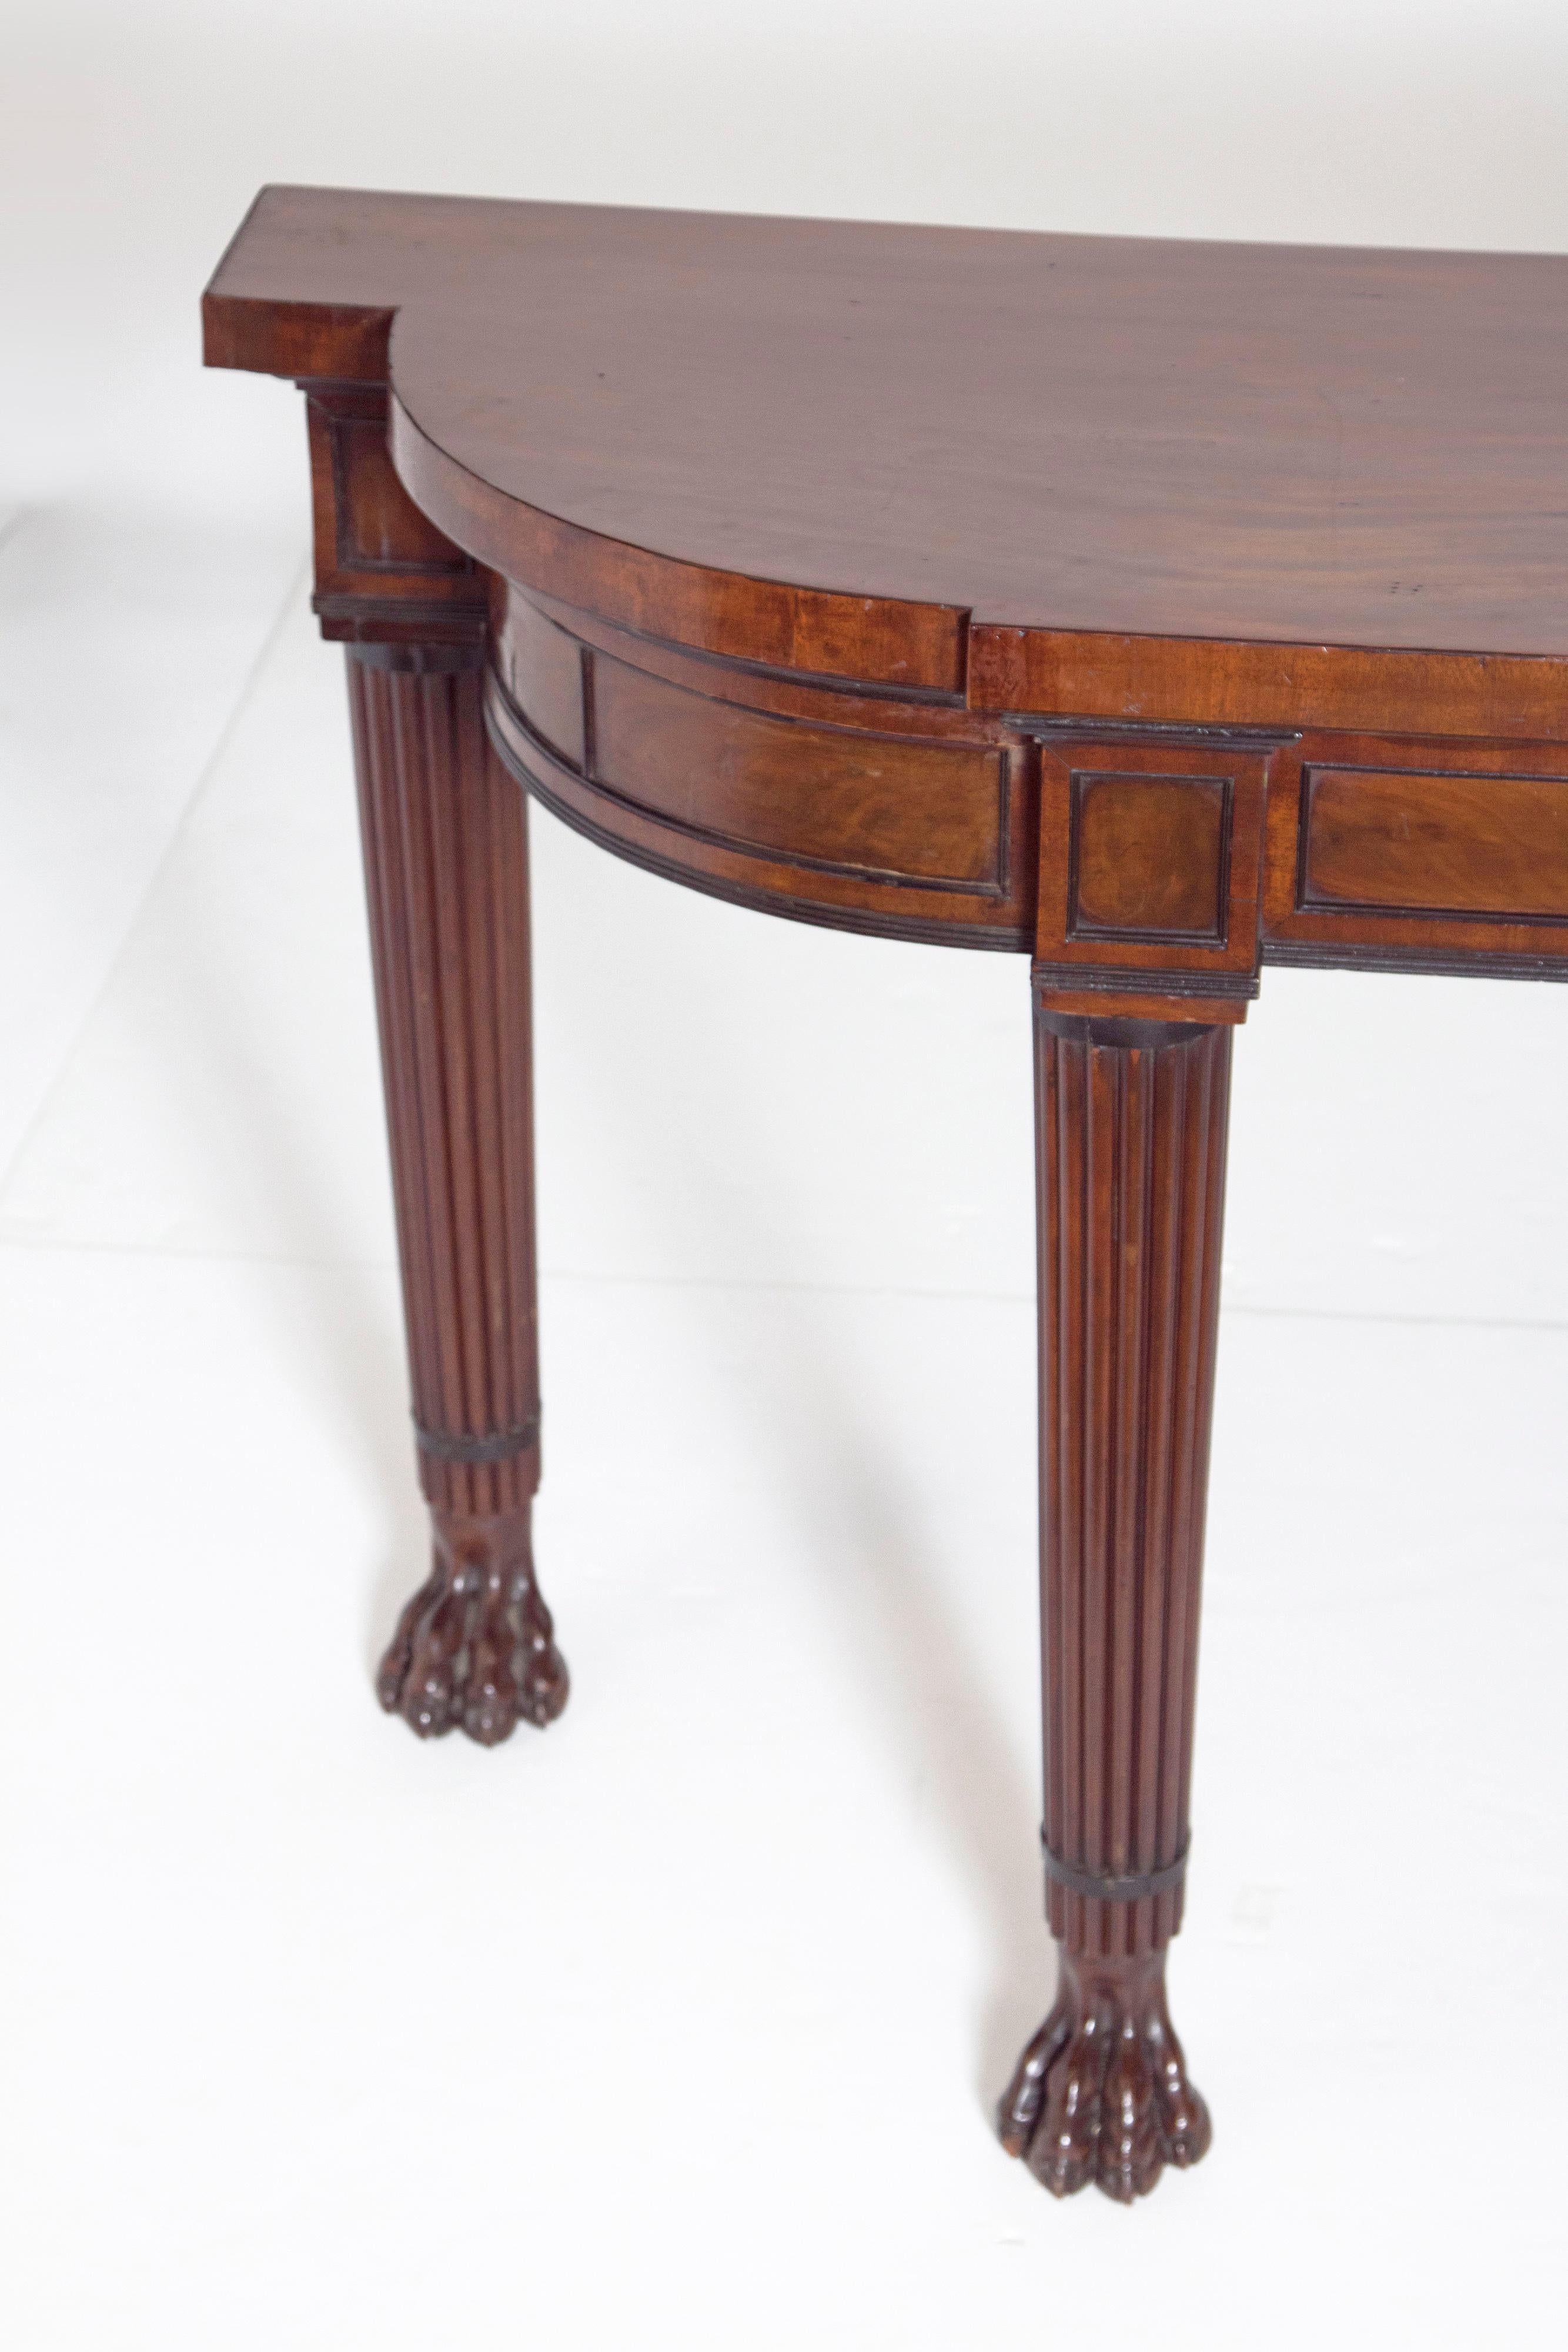 Hand-Crafted Early 19th Century English Mahogany Console Table